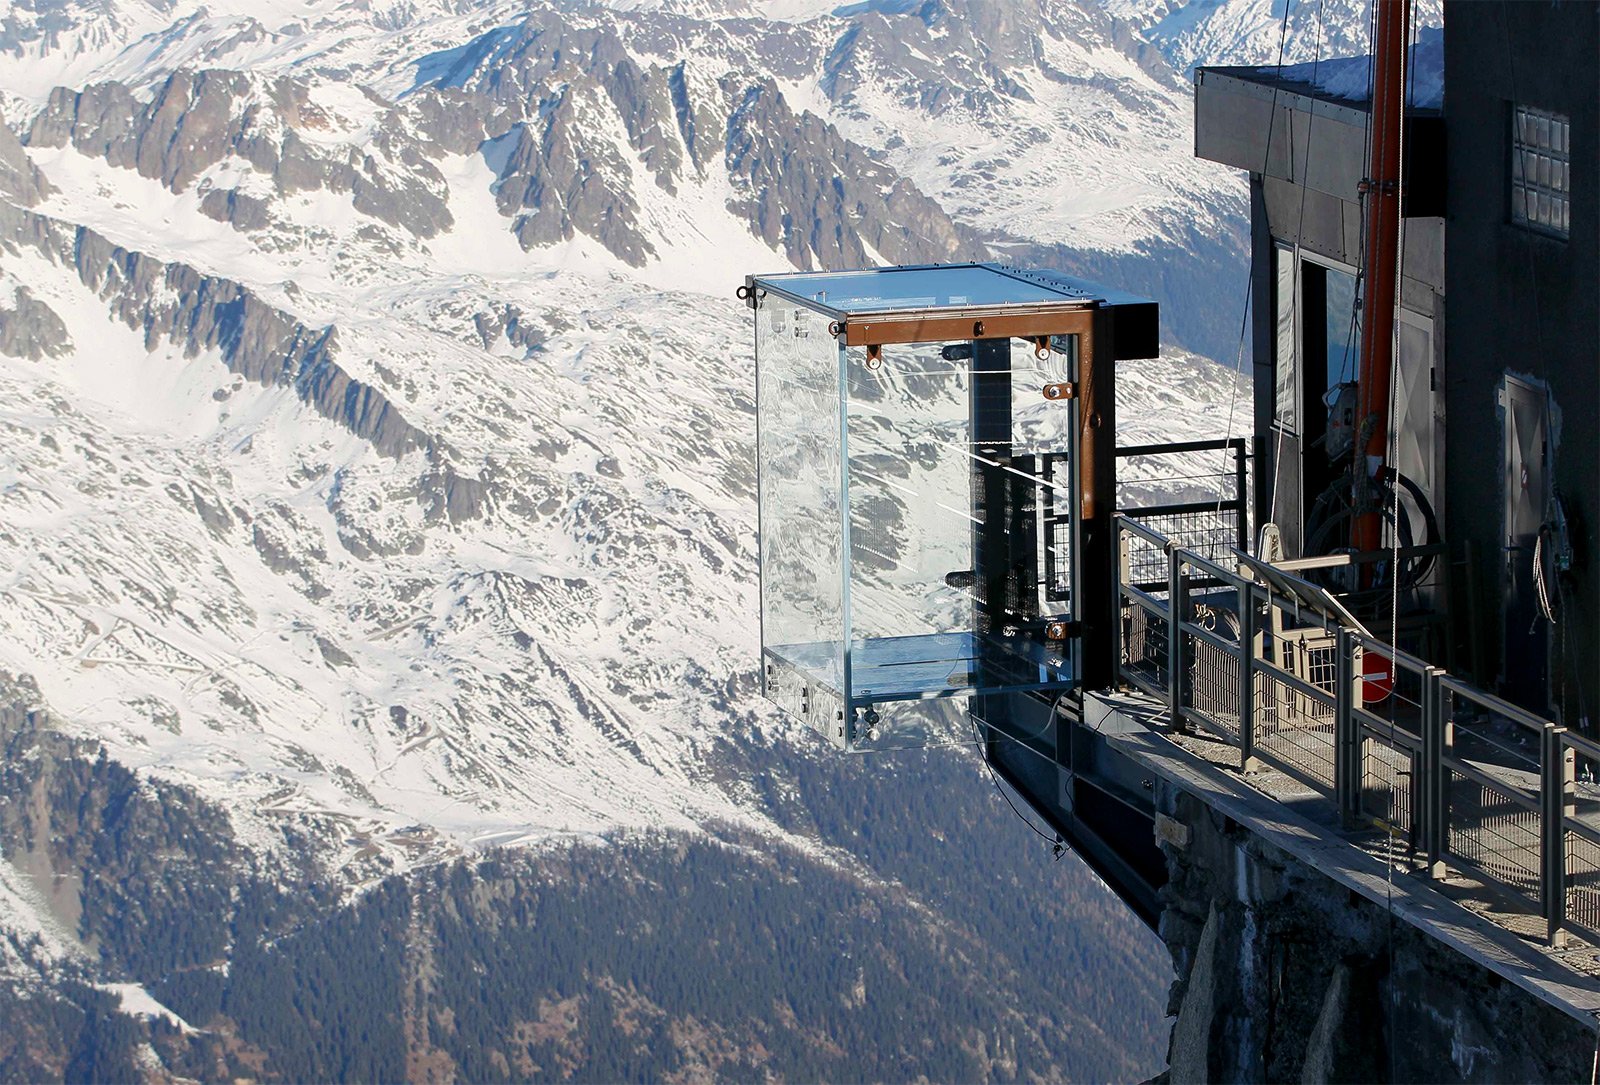 The observation deck "Step into the void", Chamonix